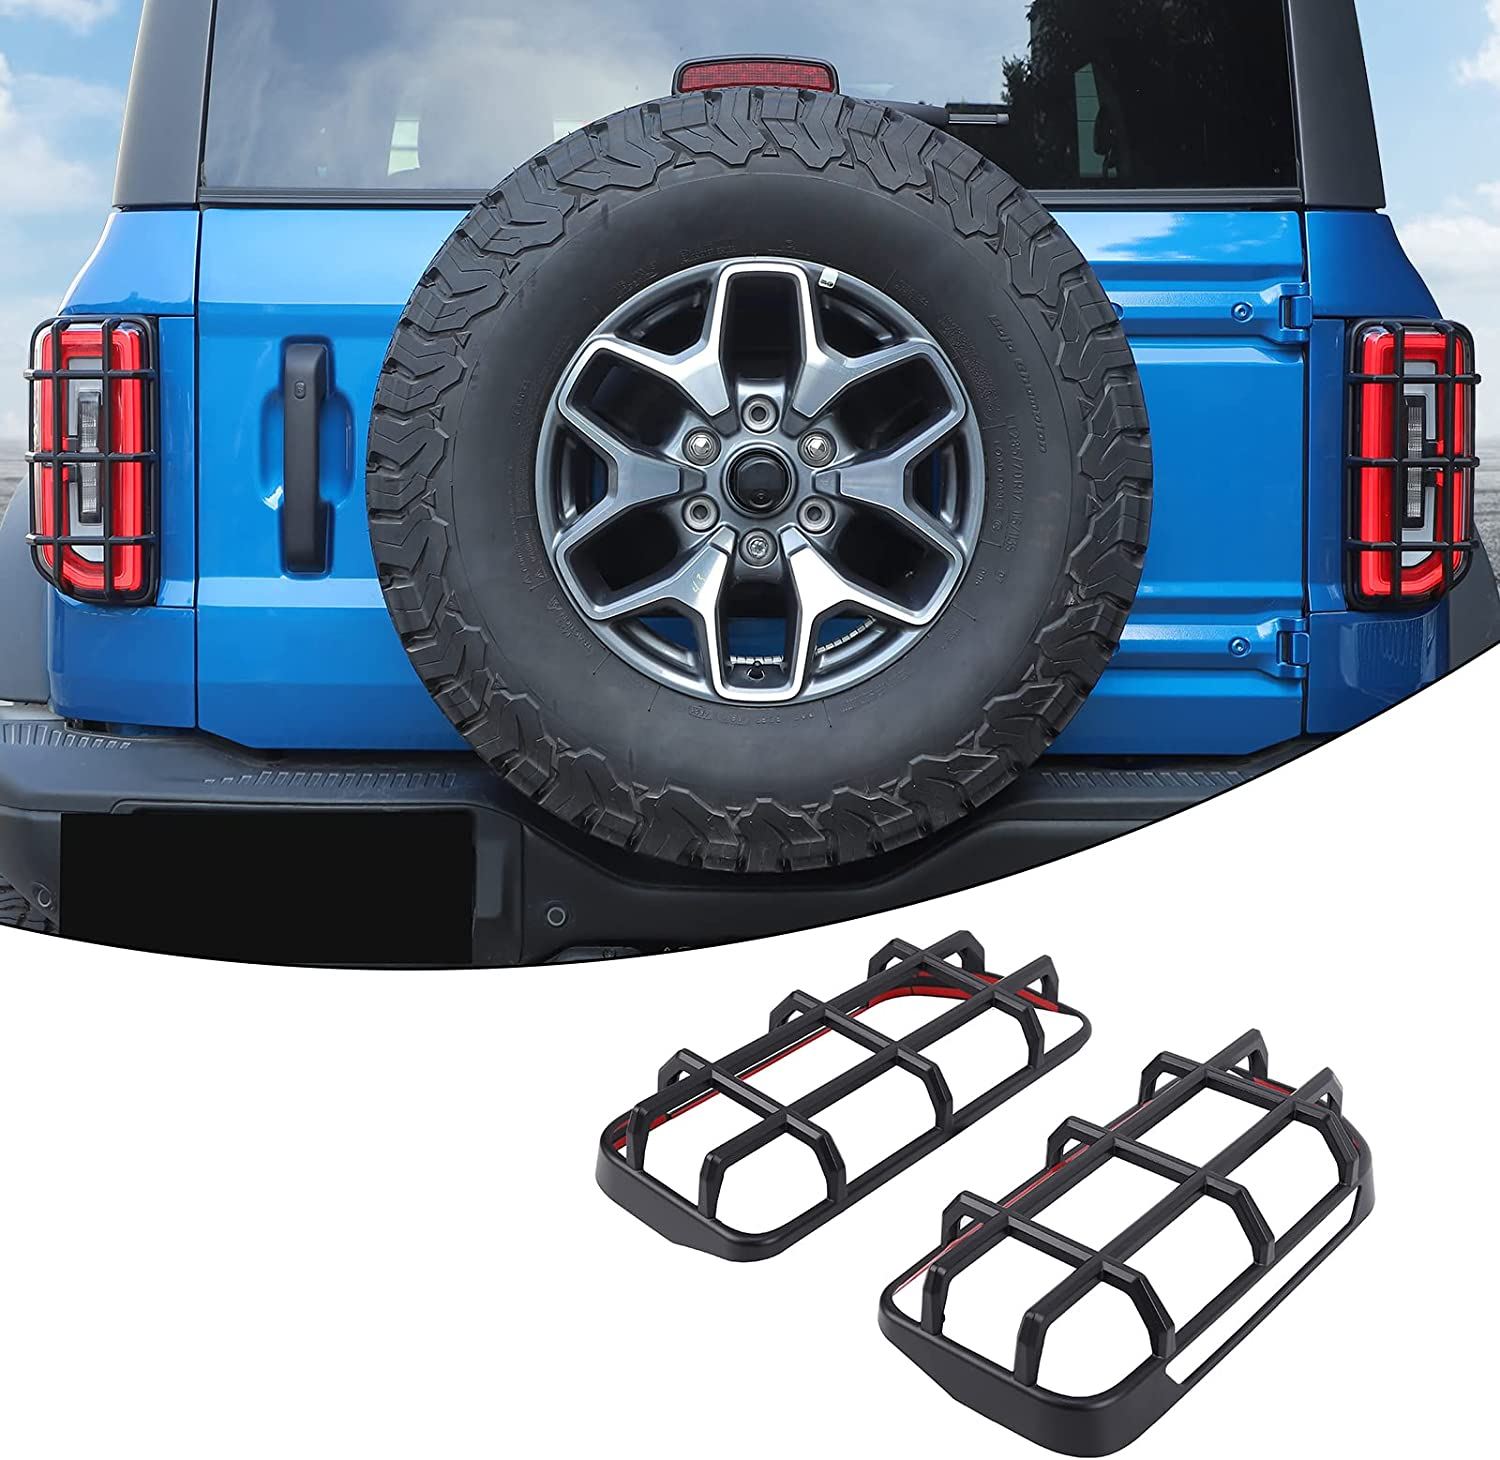 Ford Bronco Bronco Taillight Guards & Base/LED Taillight Dimensions Questions? 1685307166793